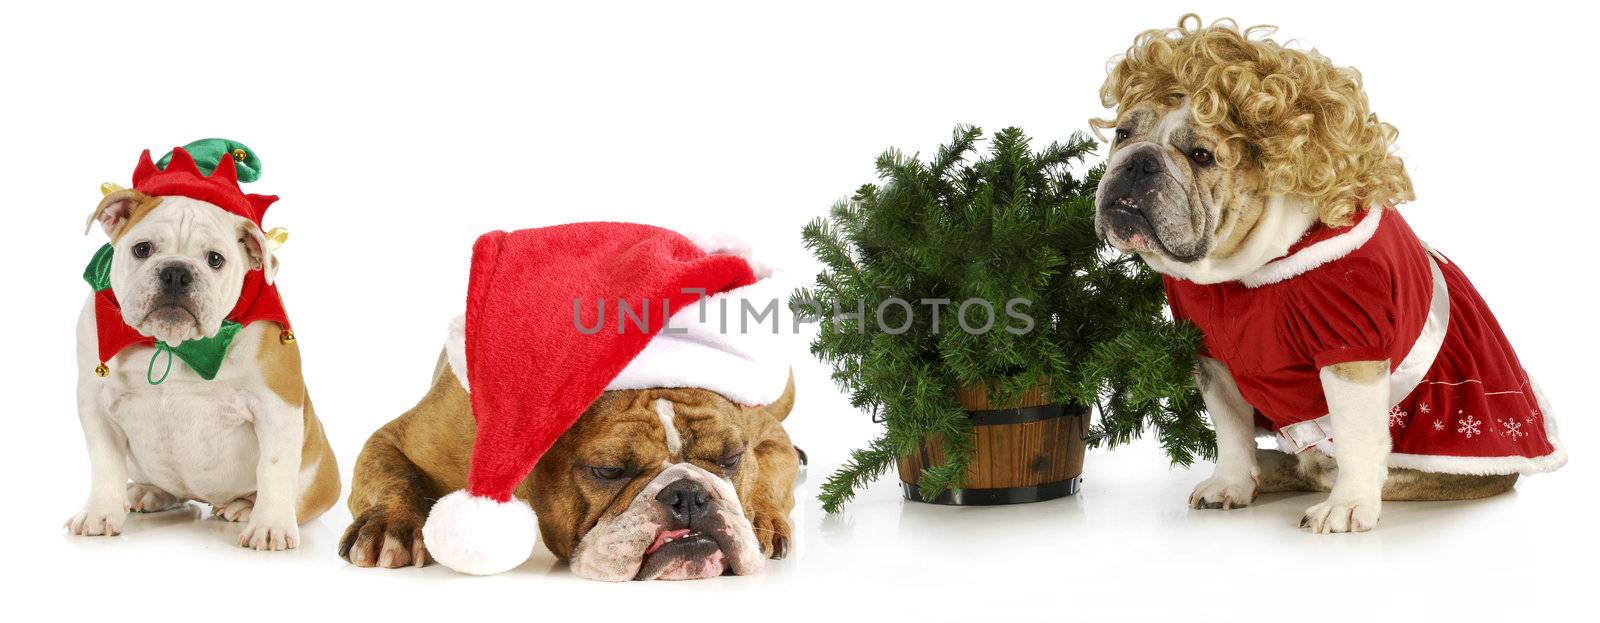 christmas bulldogs - Santa, Mrs. Claus and an elf sitting with a Christmas tree on white background